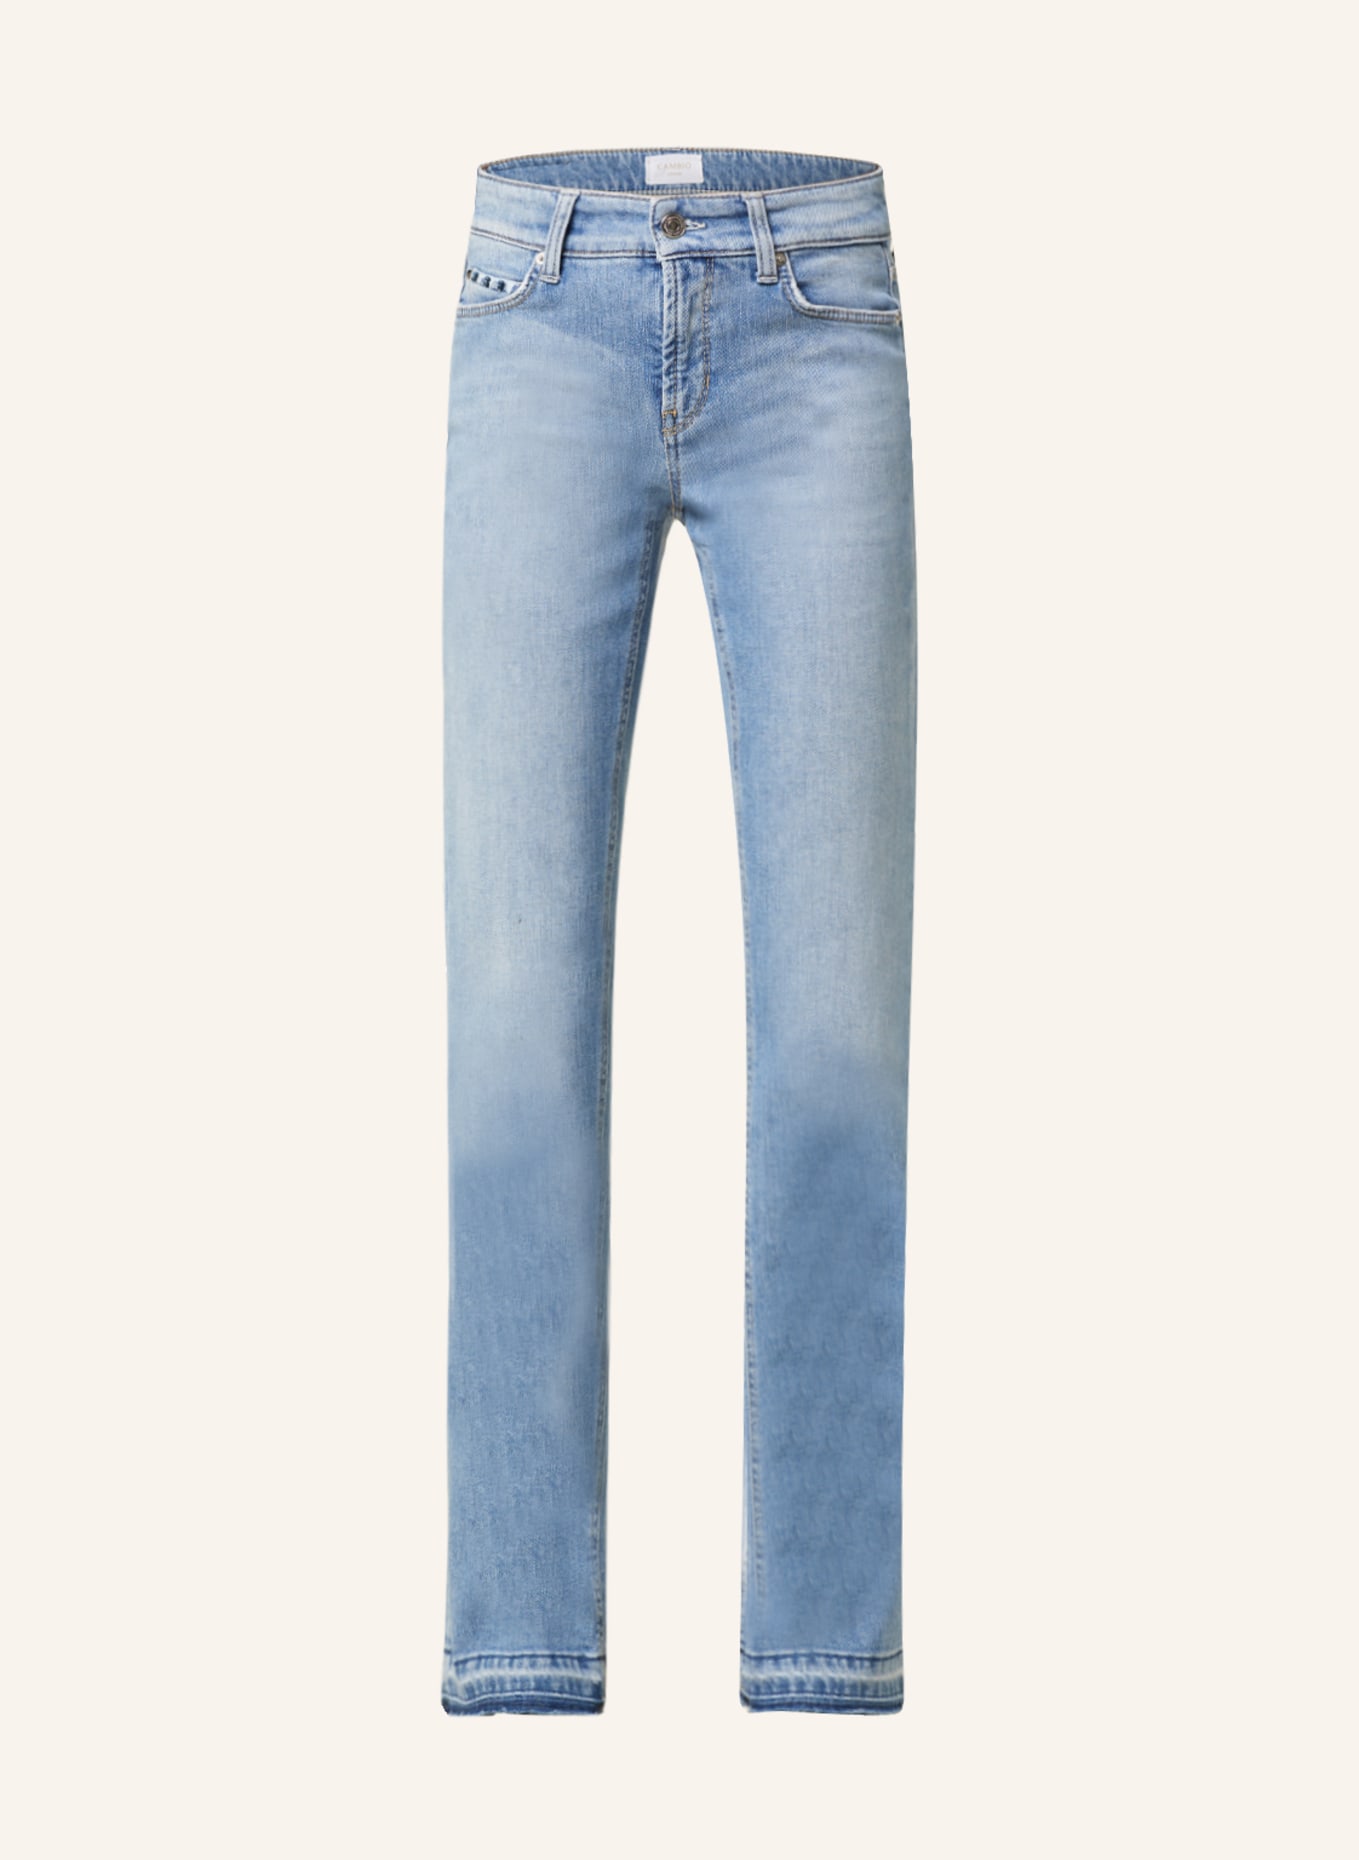 CAMBIO Flared jeans PARIS, Color: 5212 light used open hem (Image 1)